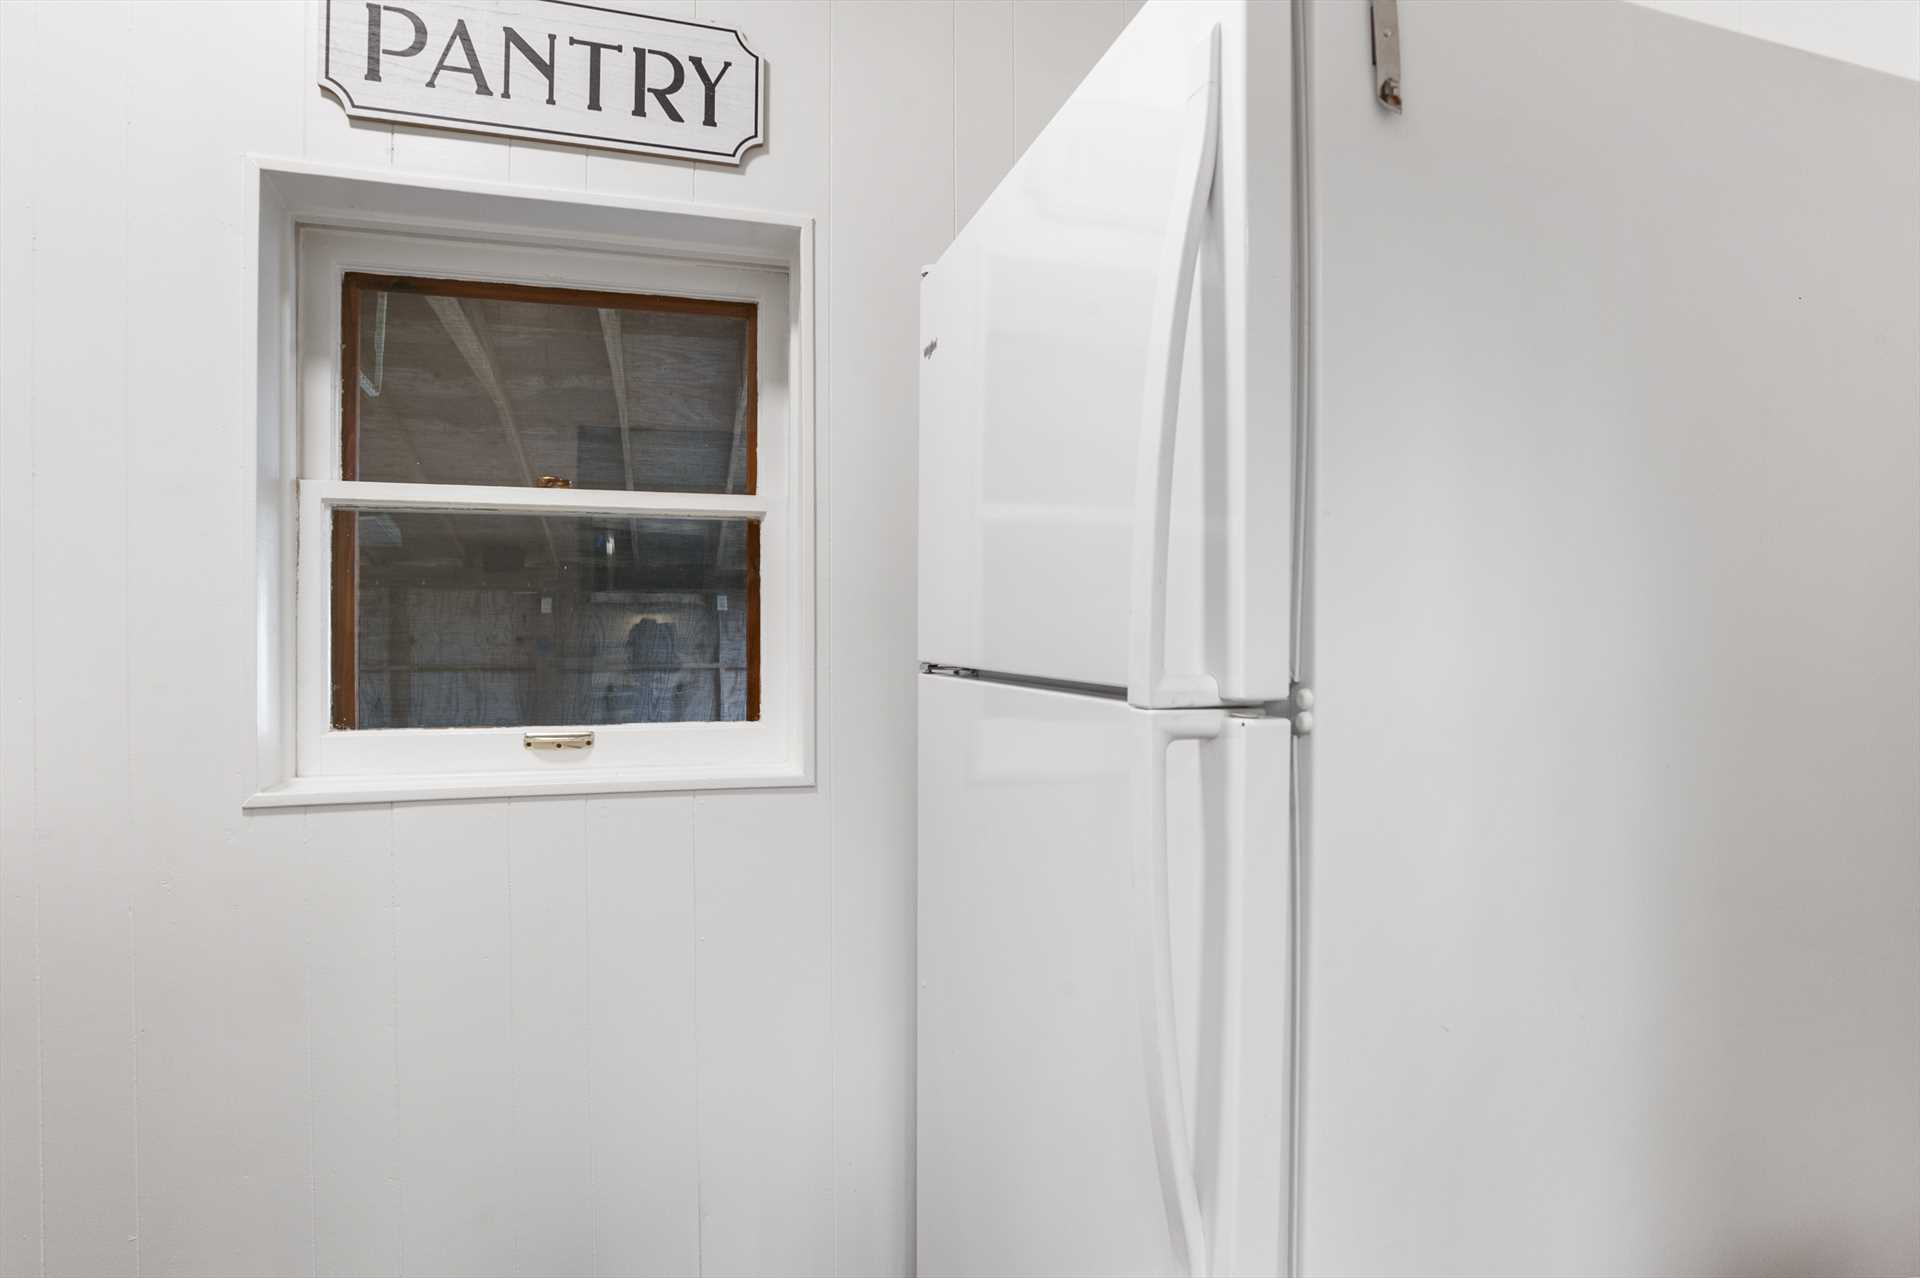                                                 A roomy fridge and freezer combo stands ready just outside the kitchen!